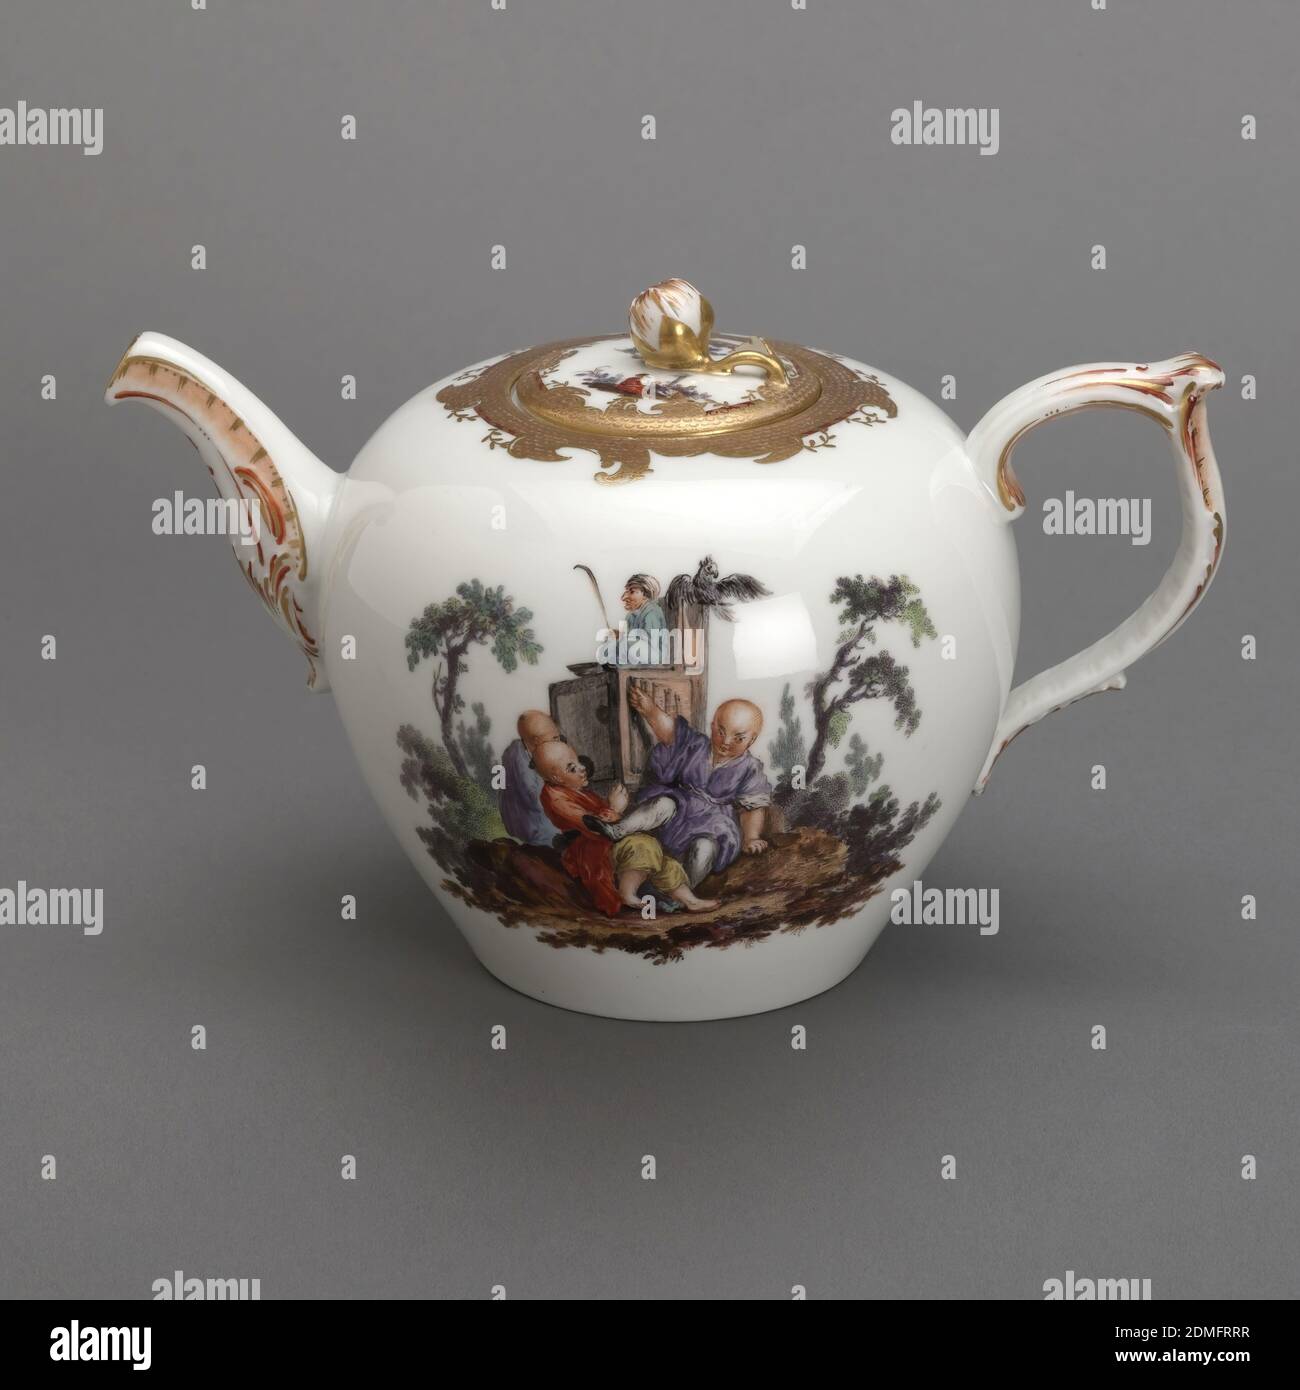 https://c8.alamy.com/comp/2DMFRRR/teapot-with-chinoiserie-vignettes-royal-porcelain-manufactory-berlin-german-established-1763-hard-paste-porcelain-vitreous-enamel-gold-a-white-rounded-teapot-with-very-delicate-spout-and-handle-three-figures-and-a-fourth-on-a-raised-seat-in-an-outdoor-scene-painted-in-overglaze-thick-border-of-gilt-around-the-lid-with-a-flower-knob-germany-ca-1770-ceramics-decorative-arts-teapot-teapot-2DMFRRR.jpg